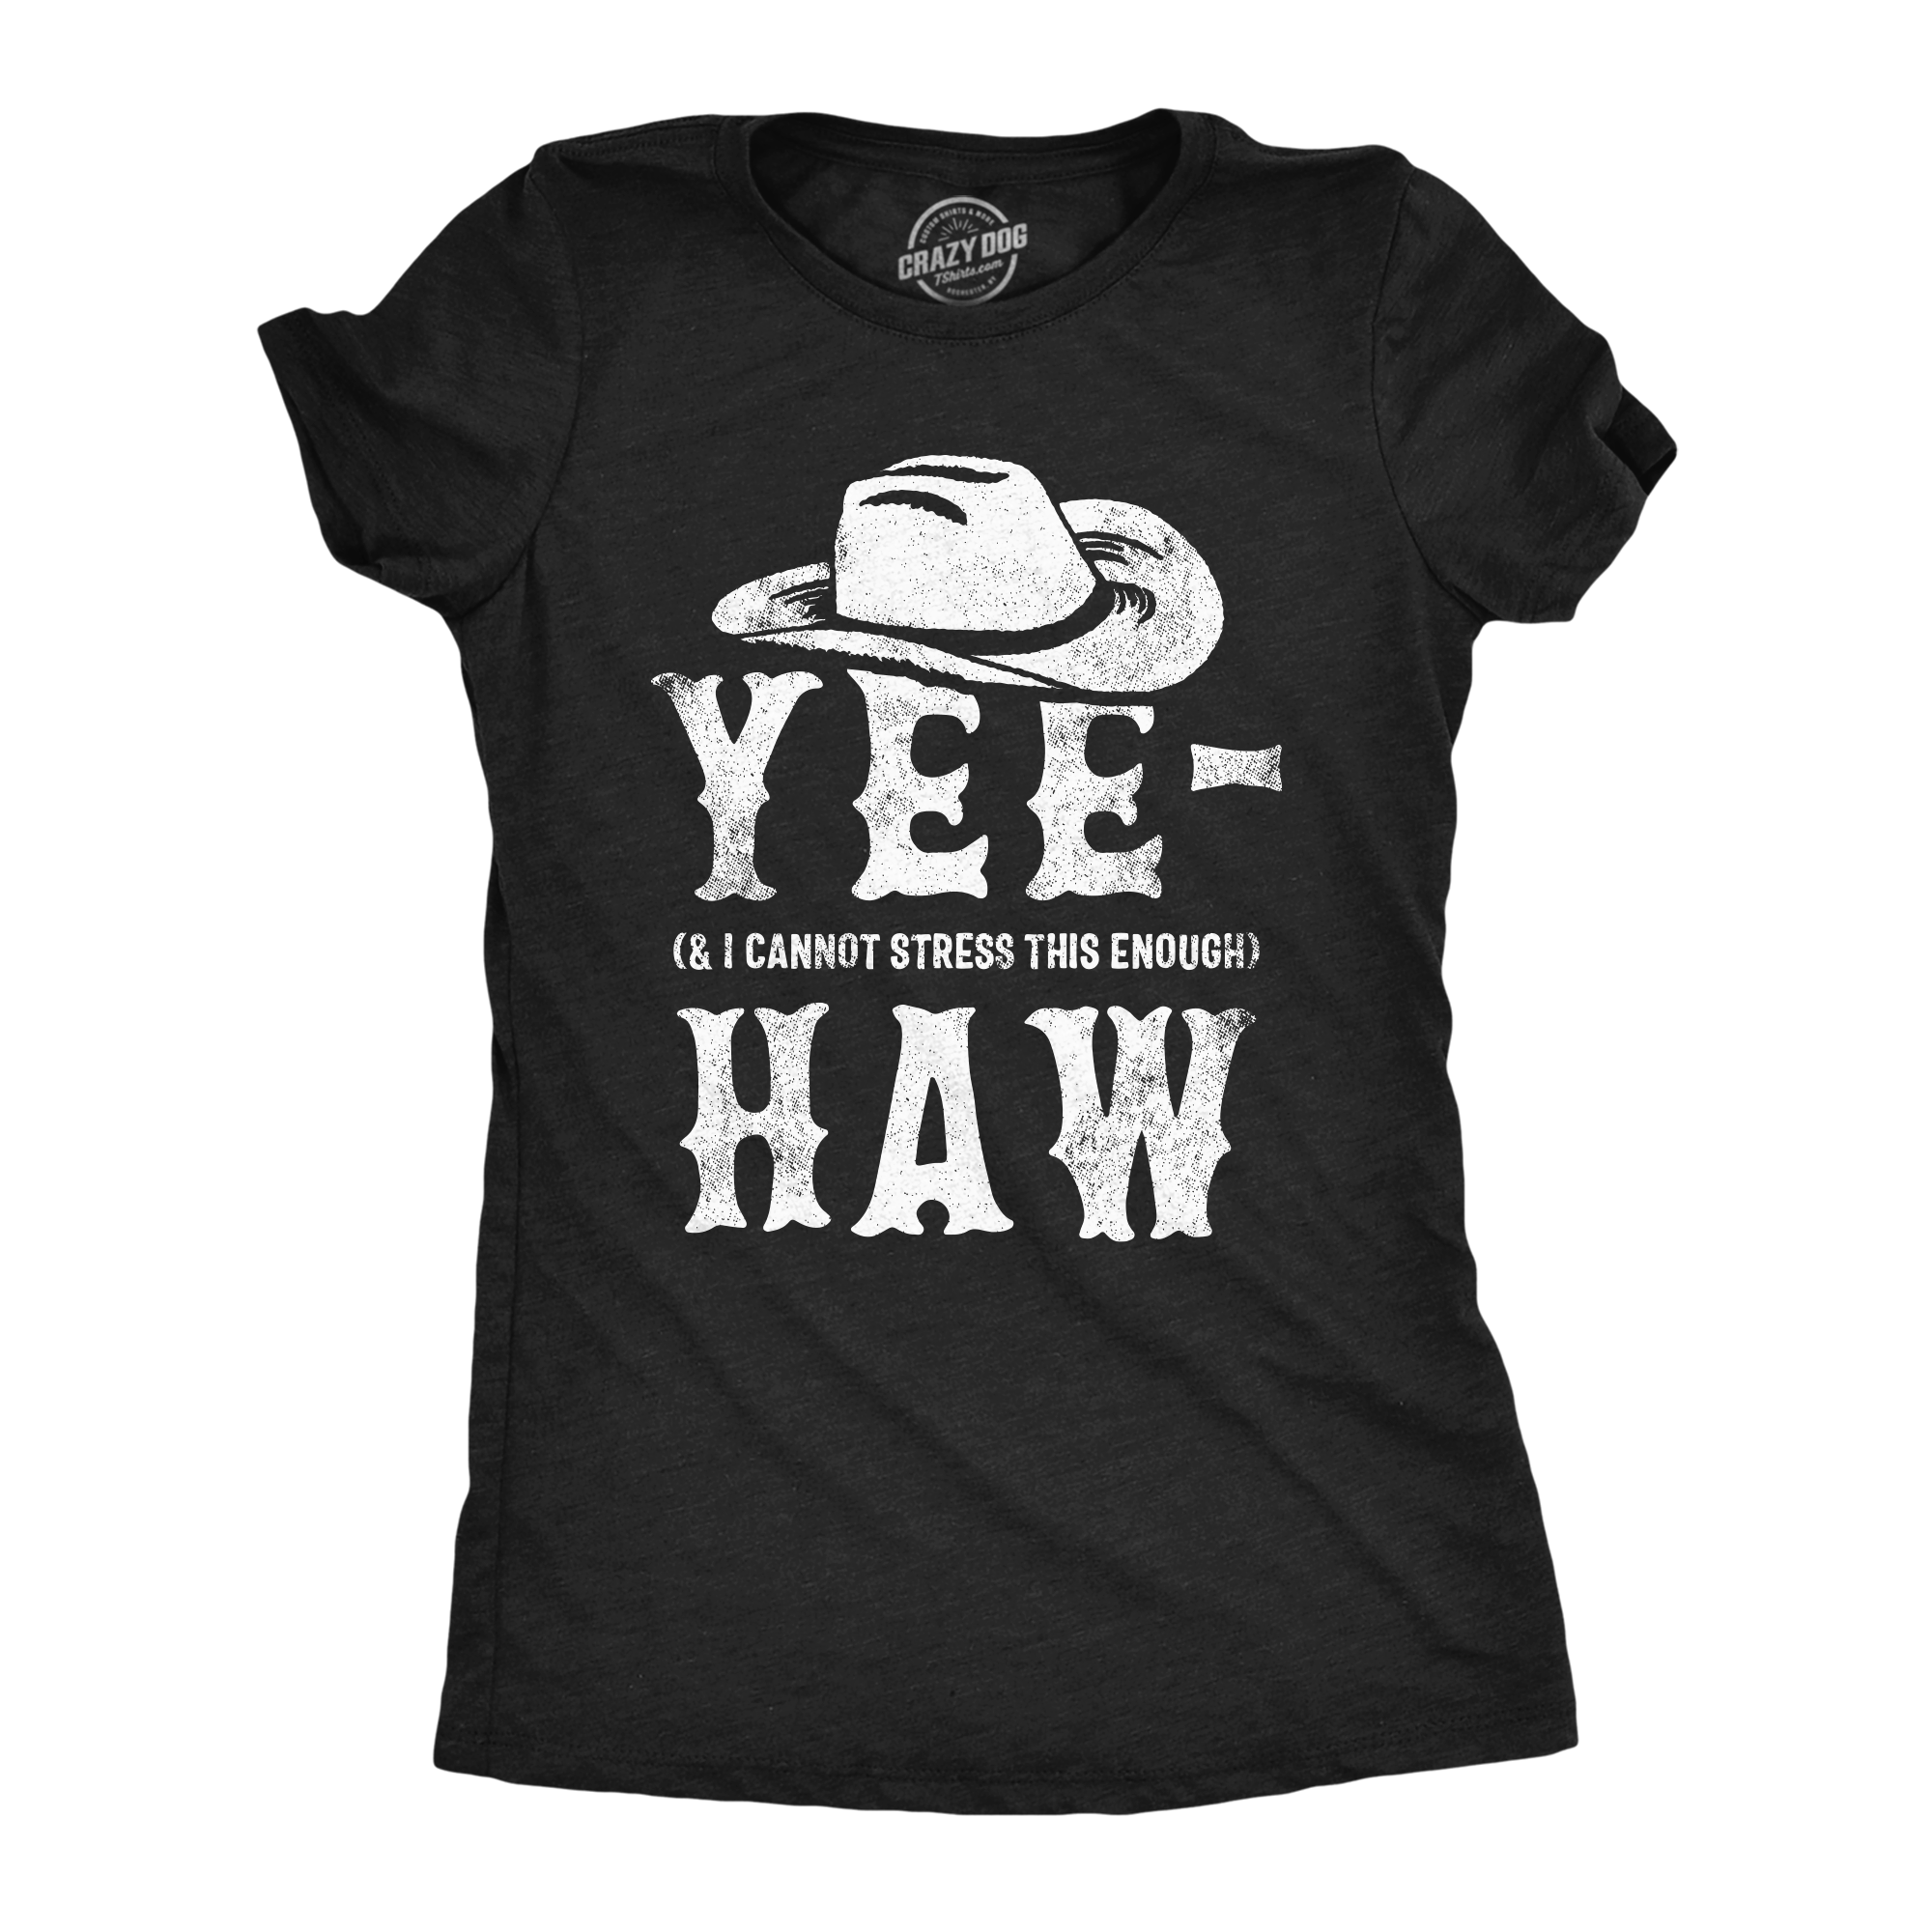 Funny Heather Black - Yee Cannot Stress Haw Yee And I Cannot Stress This Enough Haw Womens T Shirt Nerdy sarcastic Tee